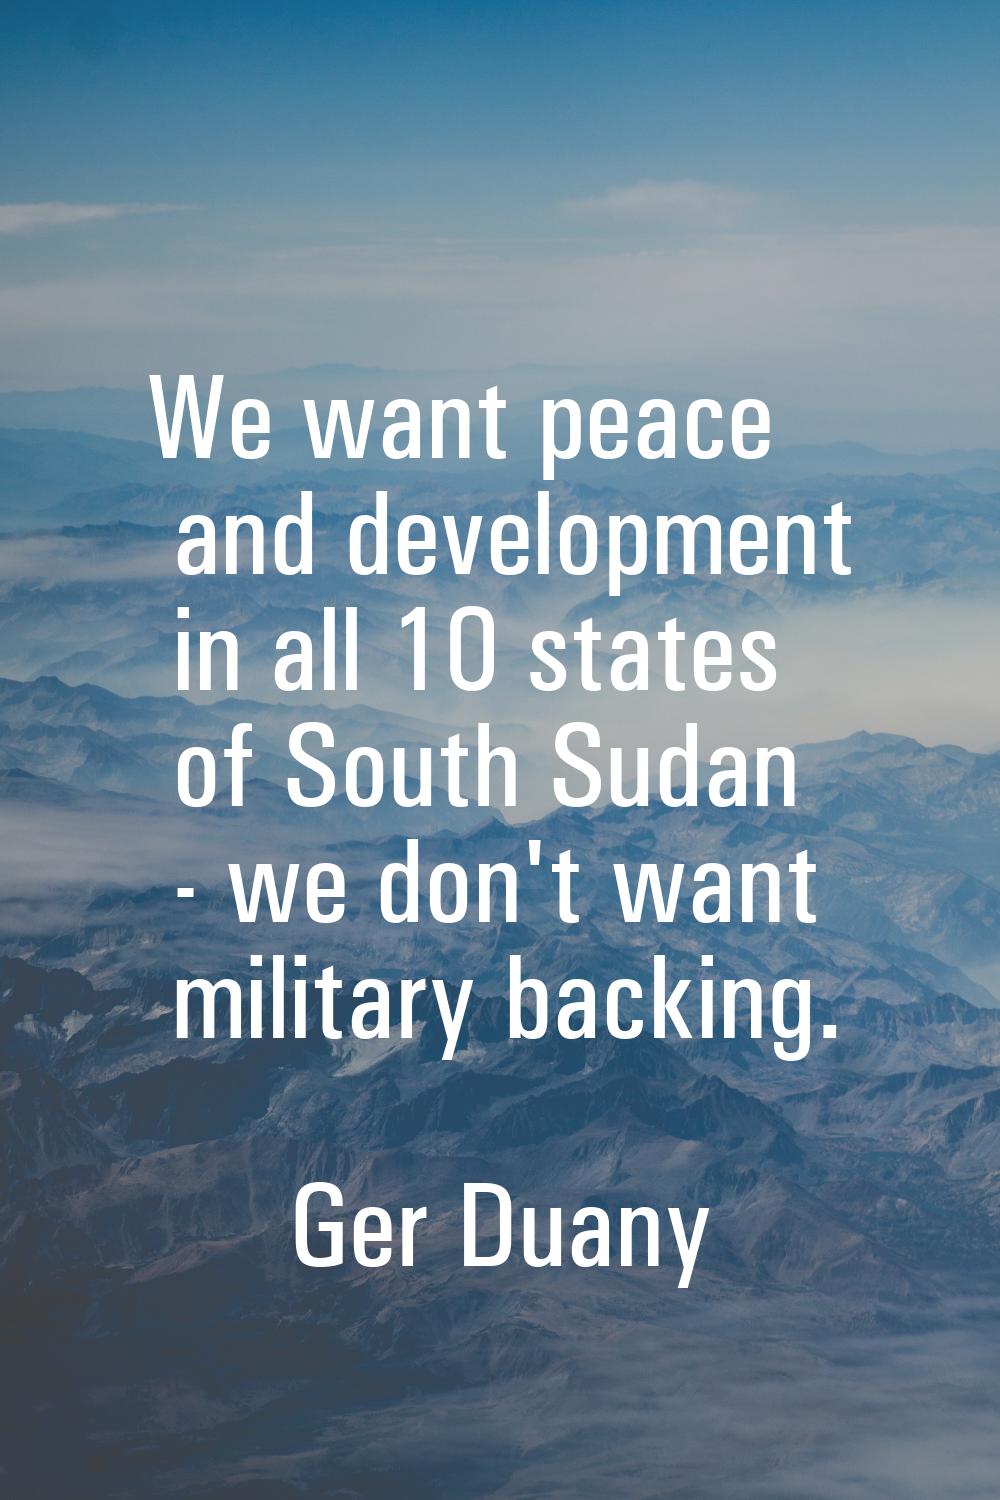 We want peace and development in all 10 states of South Sudan - we don't want military backing.